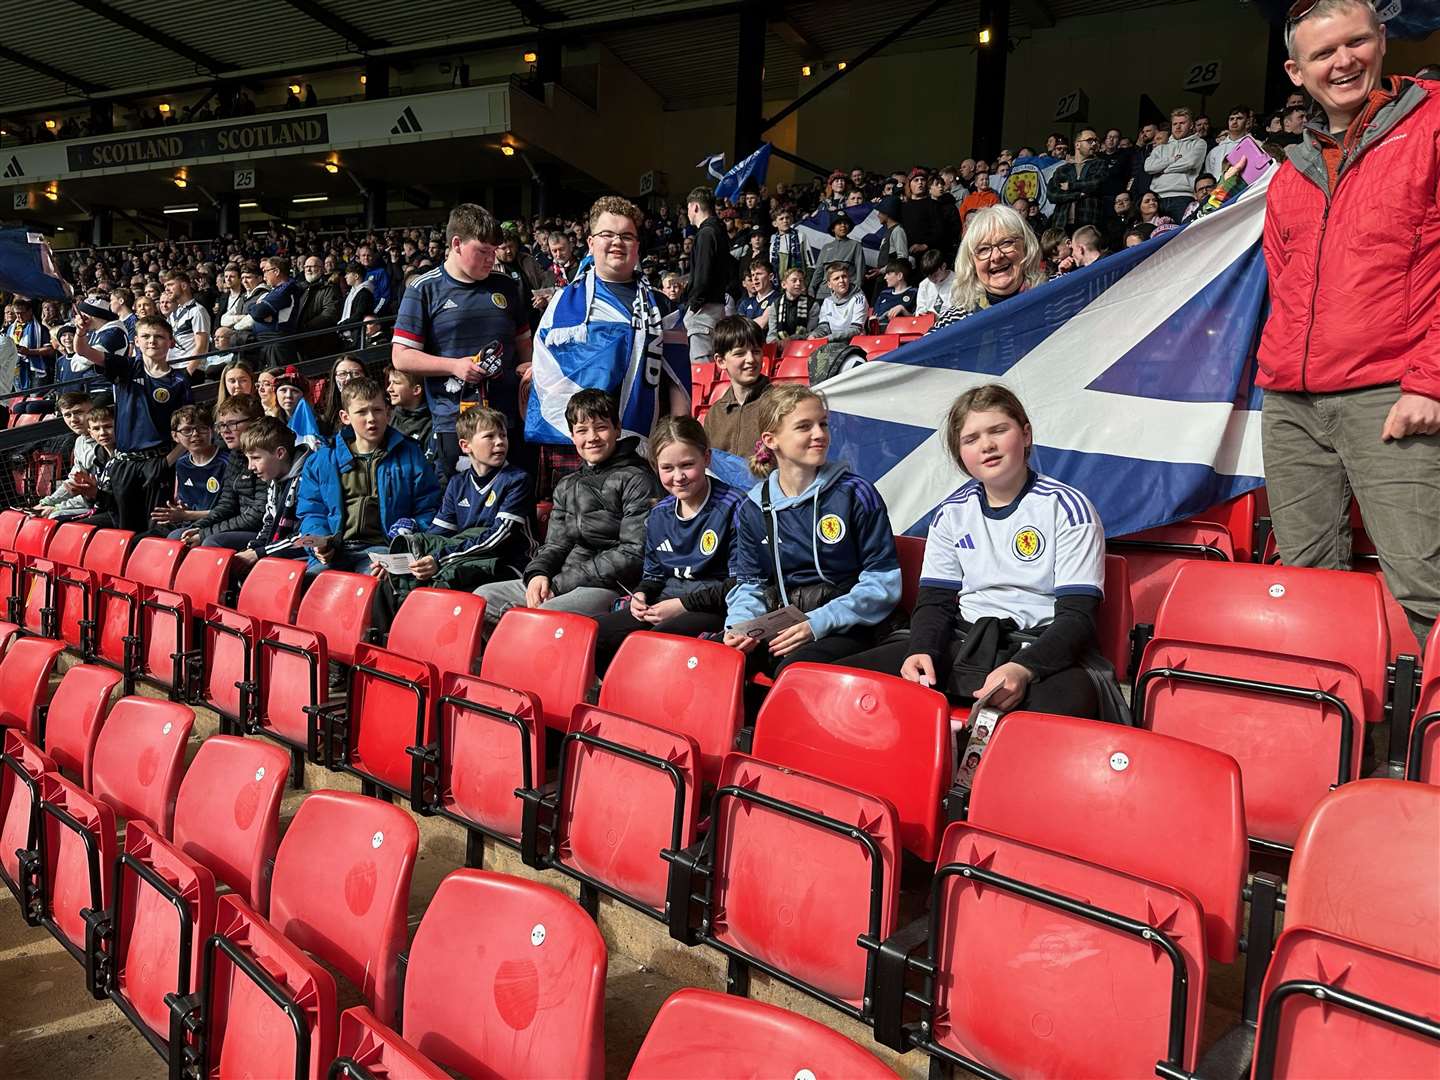 Some of the Kinlochbervie pupils and staff at Hampden for the Cyprus game.